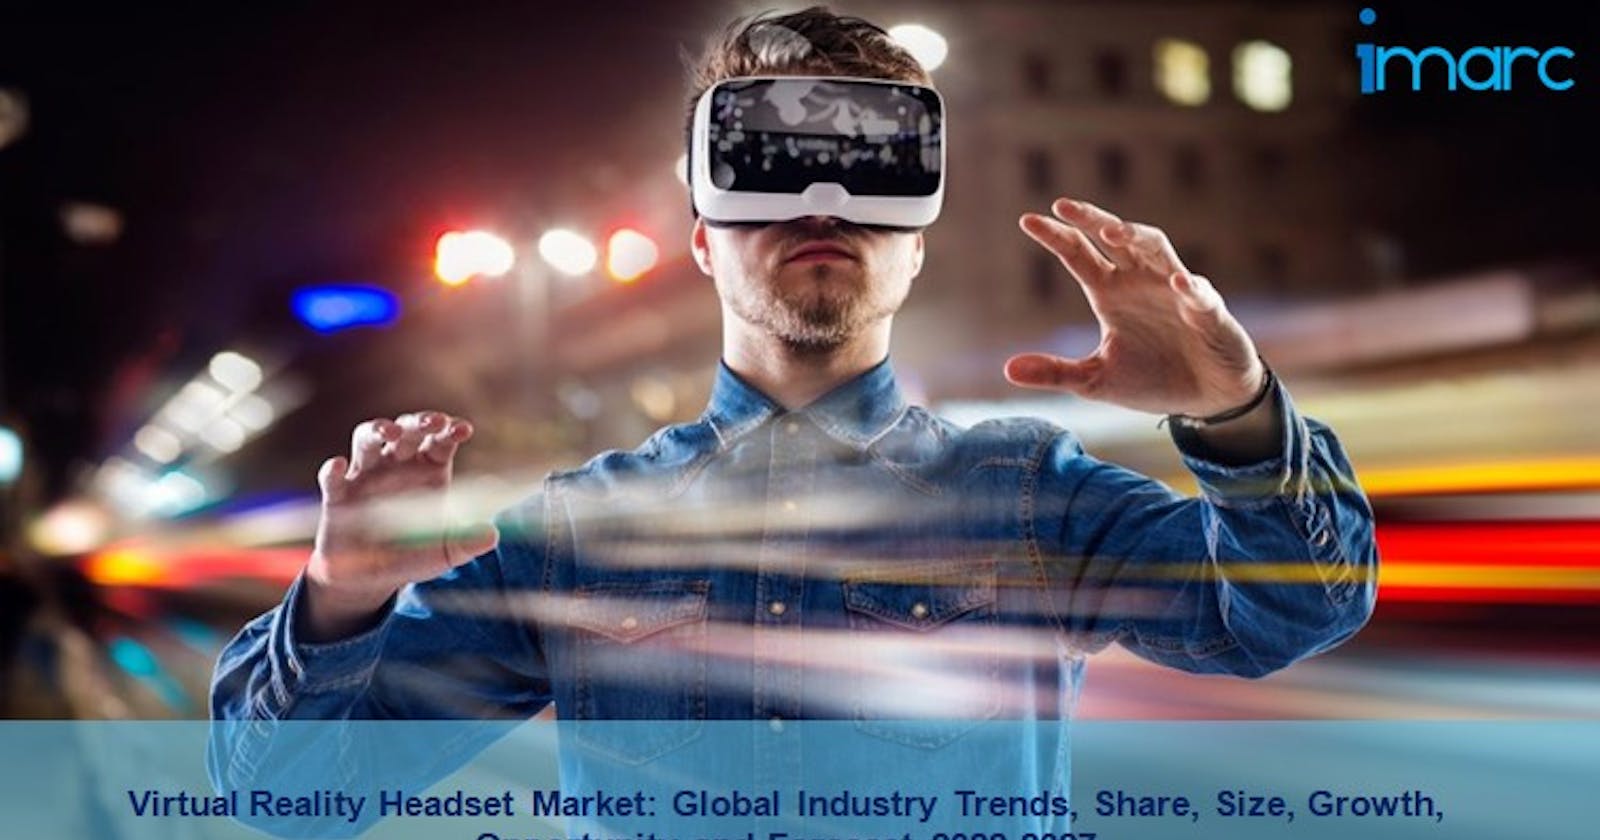 Virtual Reality Headset Market Size 2022, Trends, Share, Scope And Forecast 2027